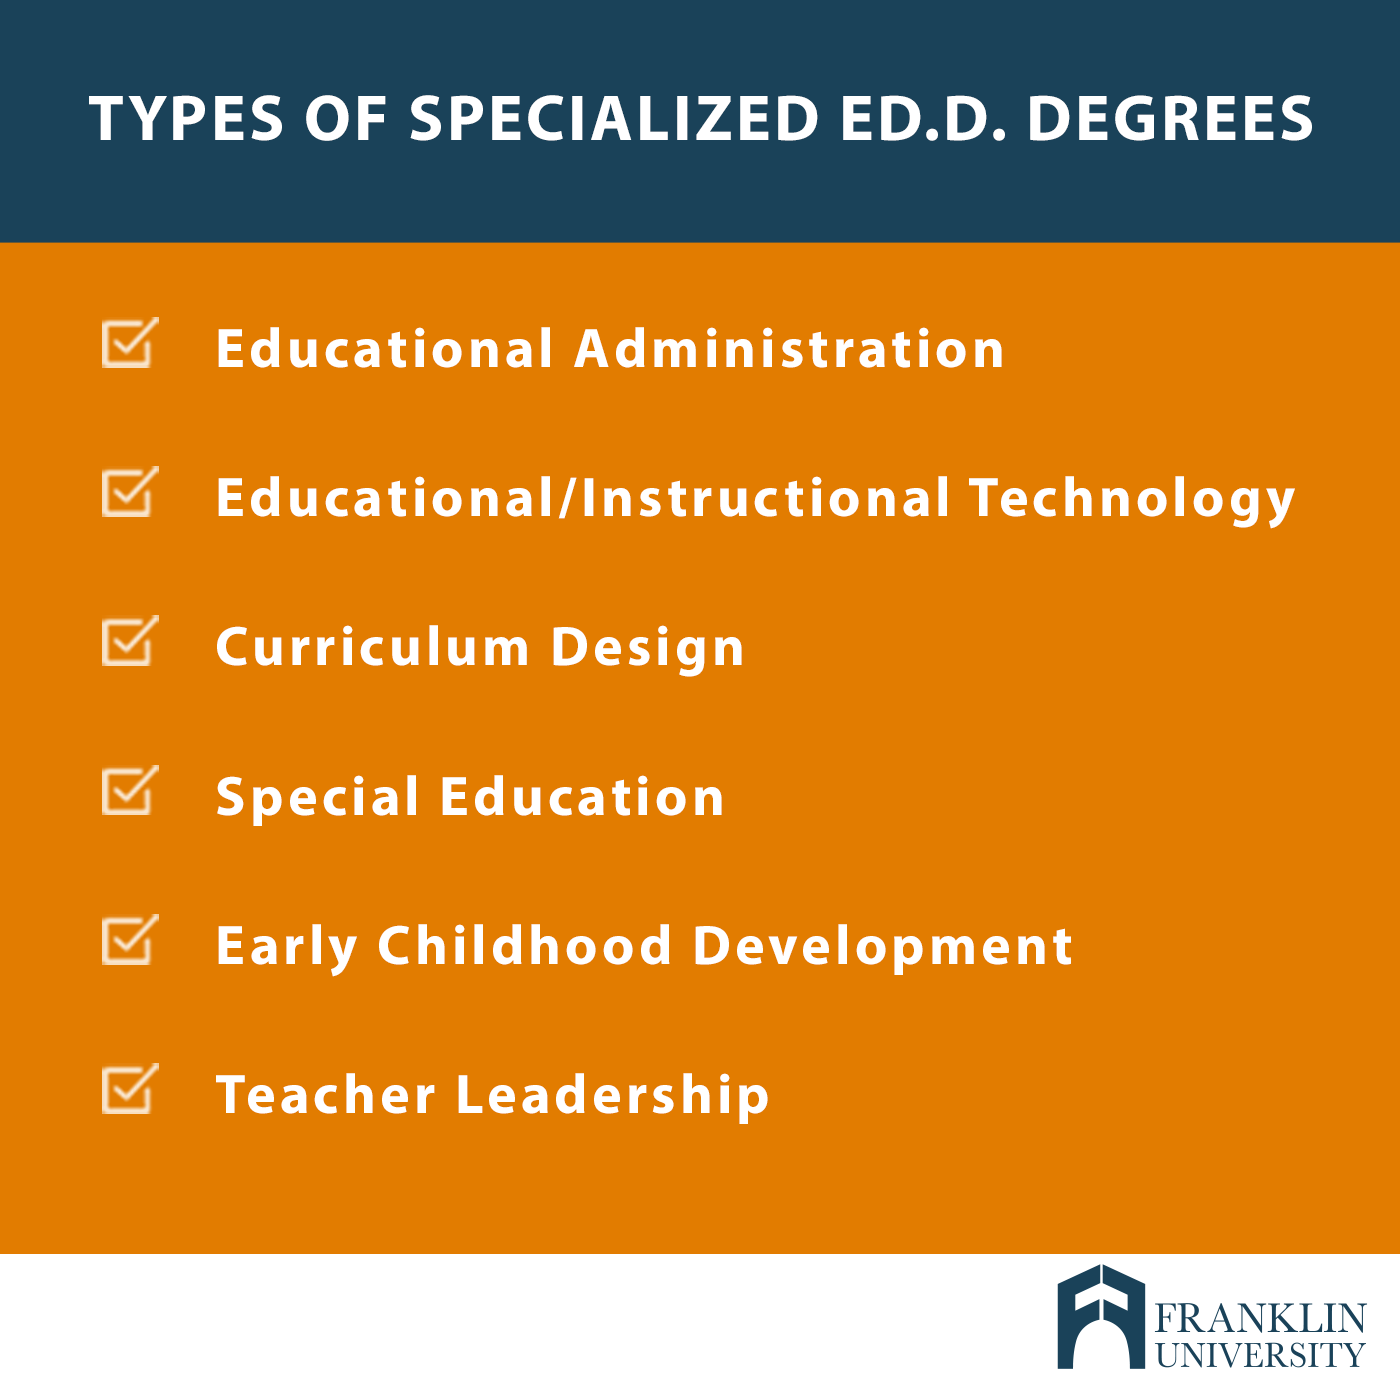 graphic describes the types of specialized ED.D degrees